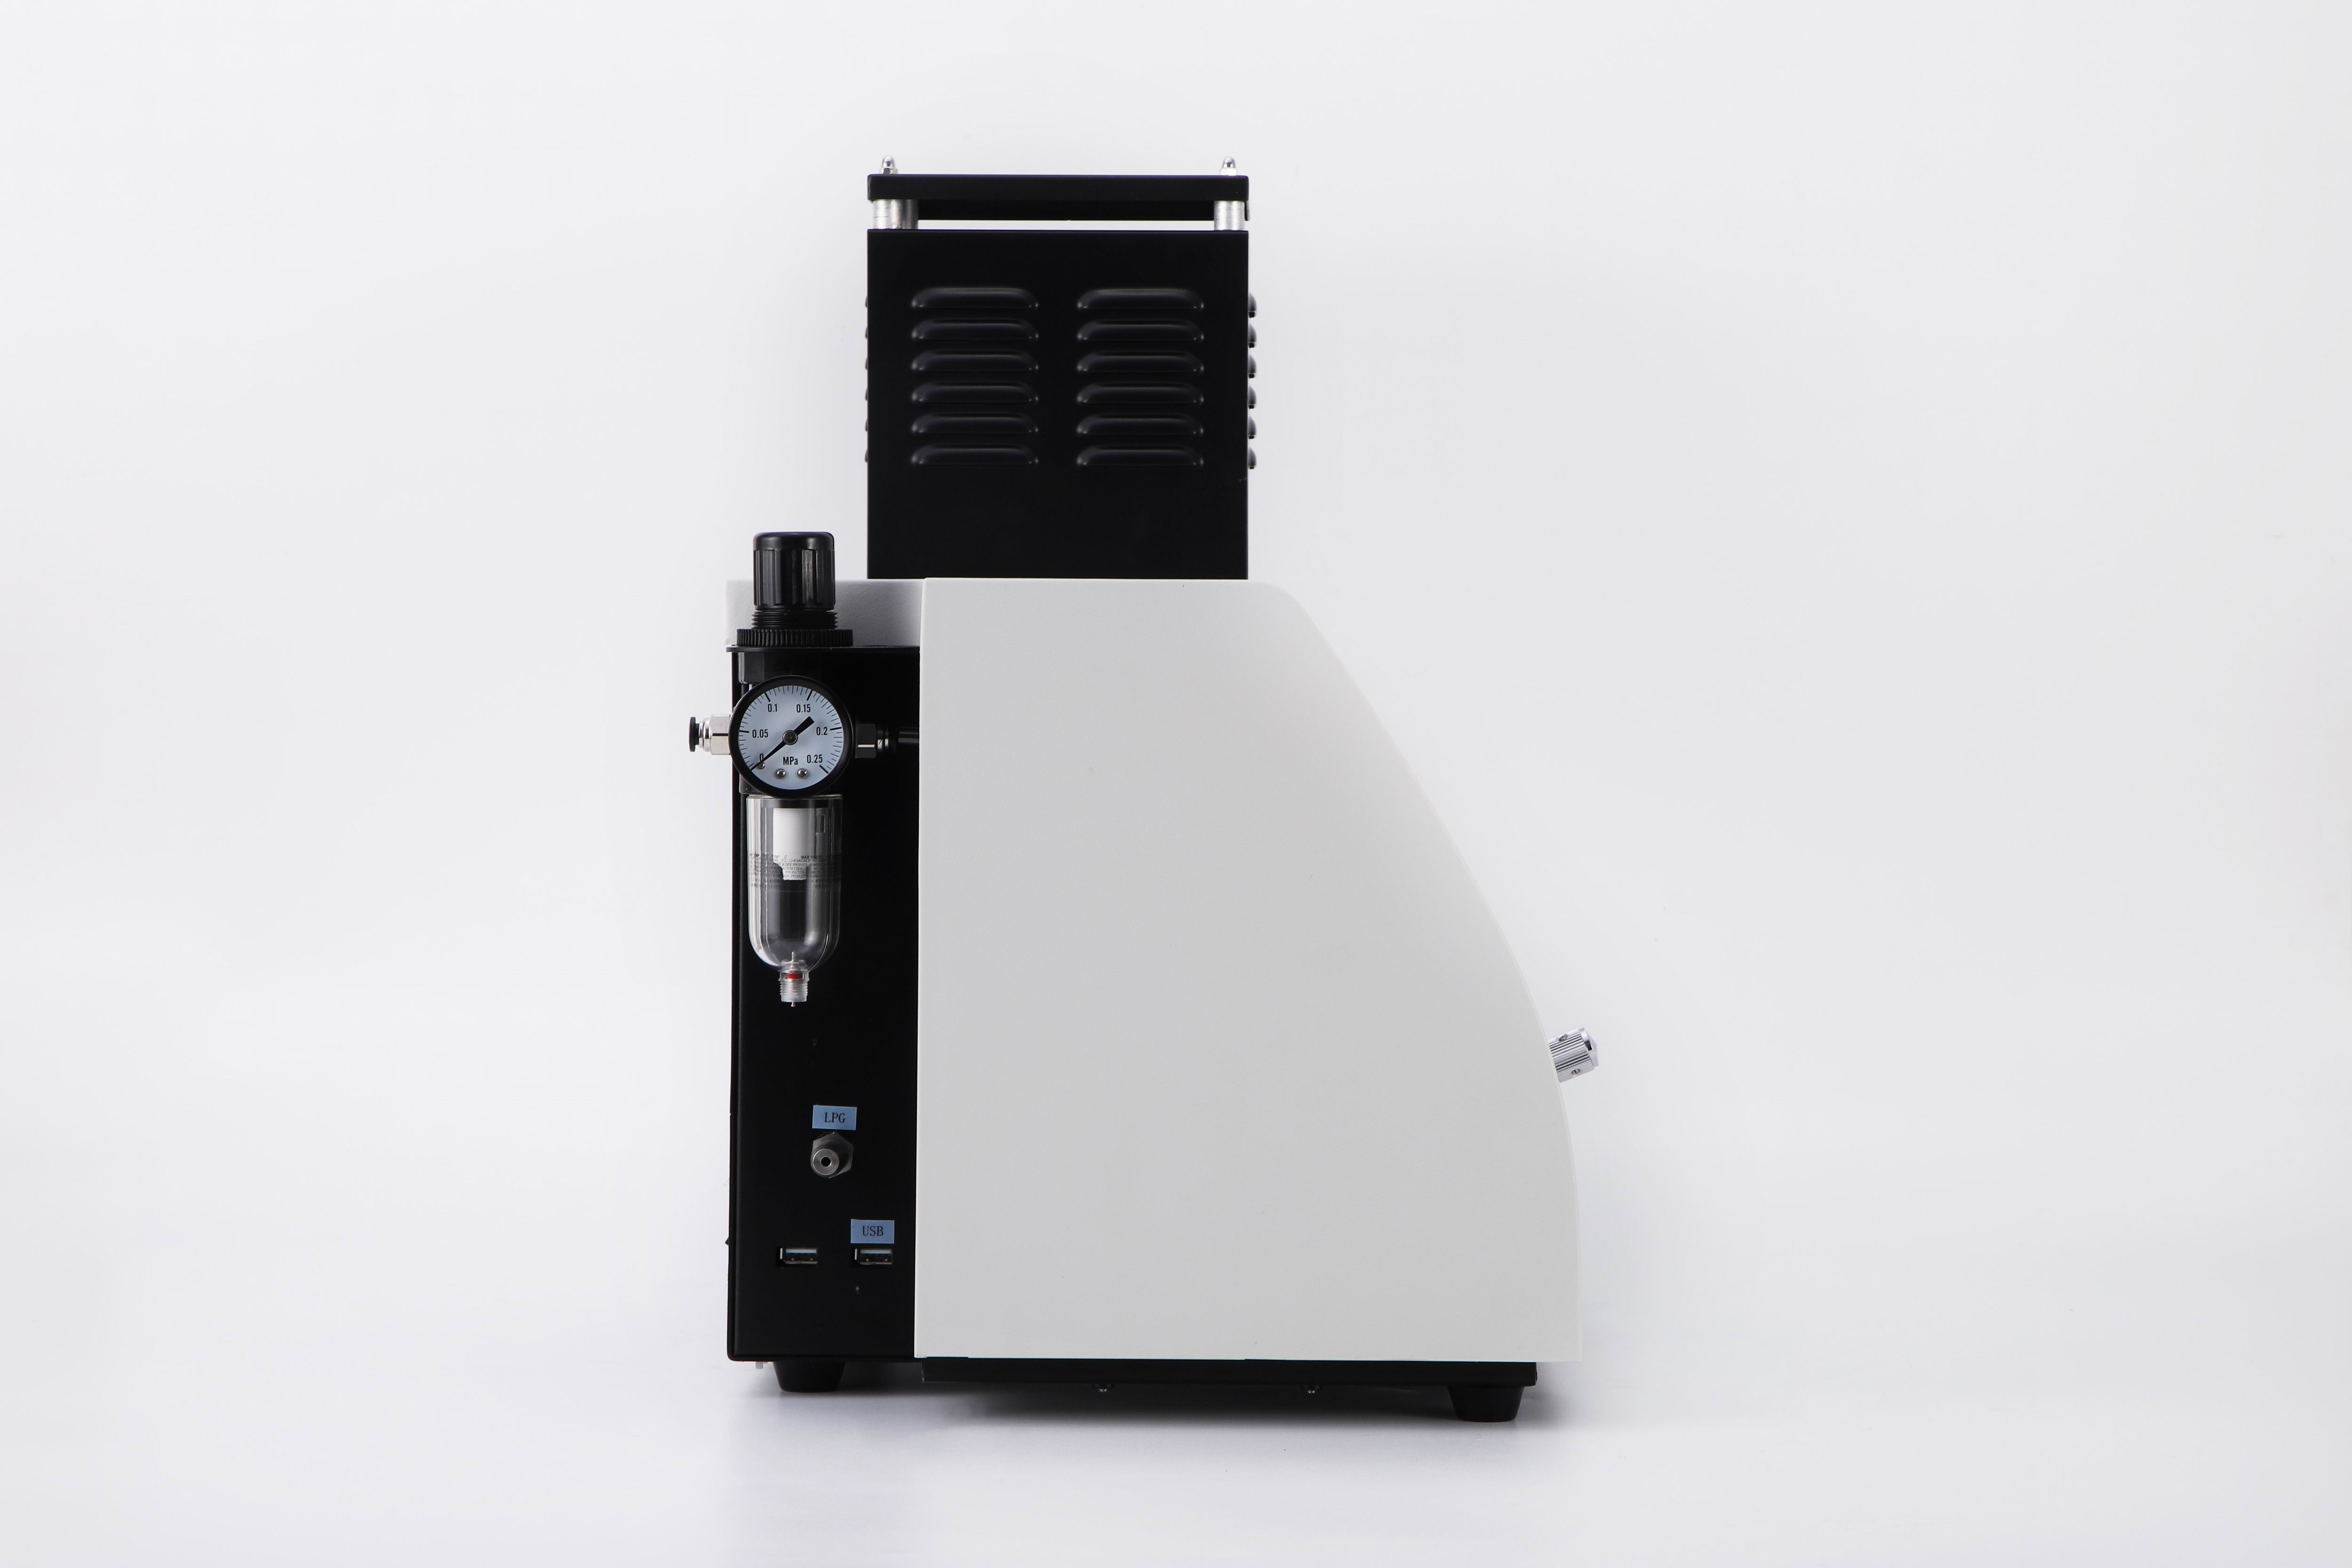  MS-5200 Flame Photometer